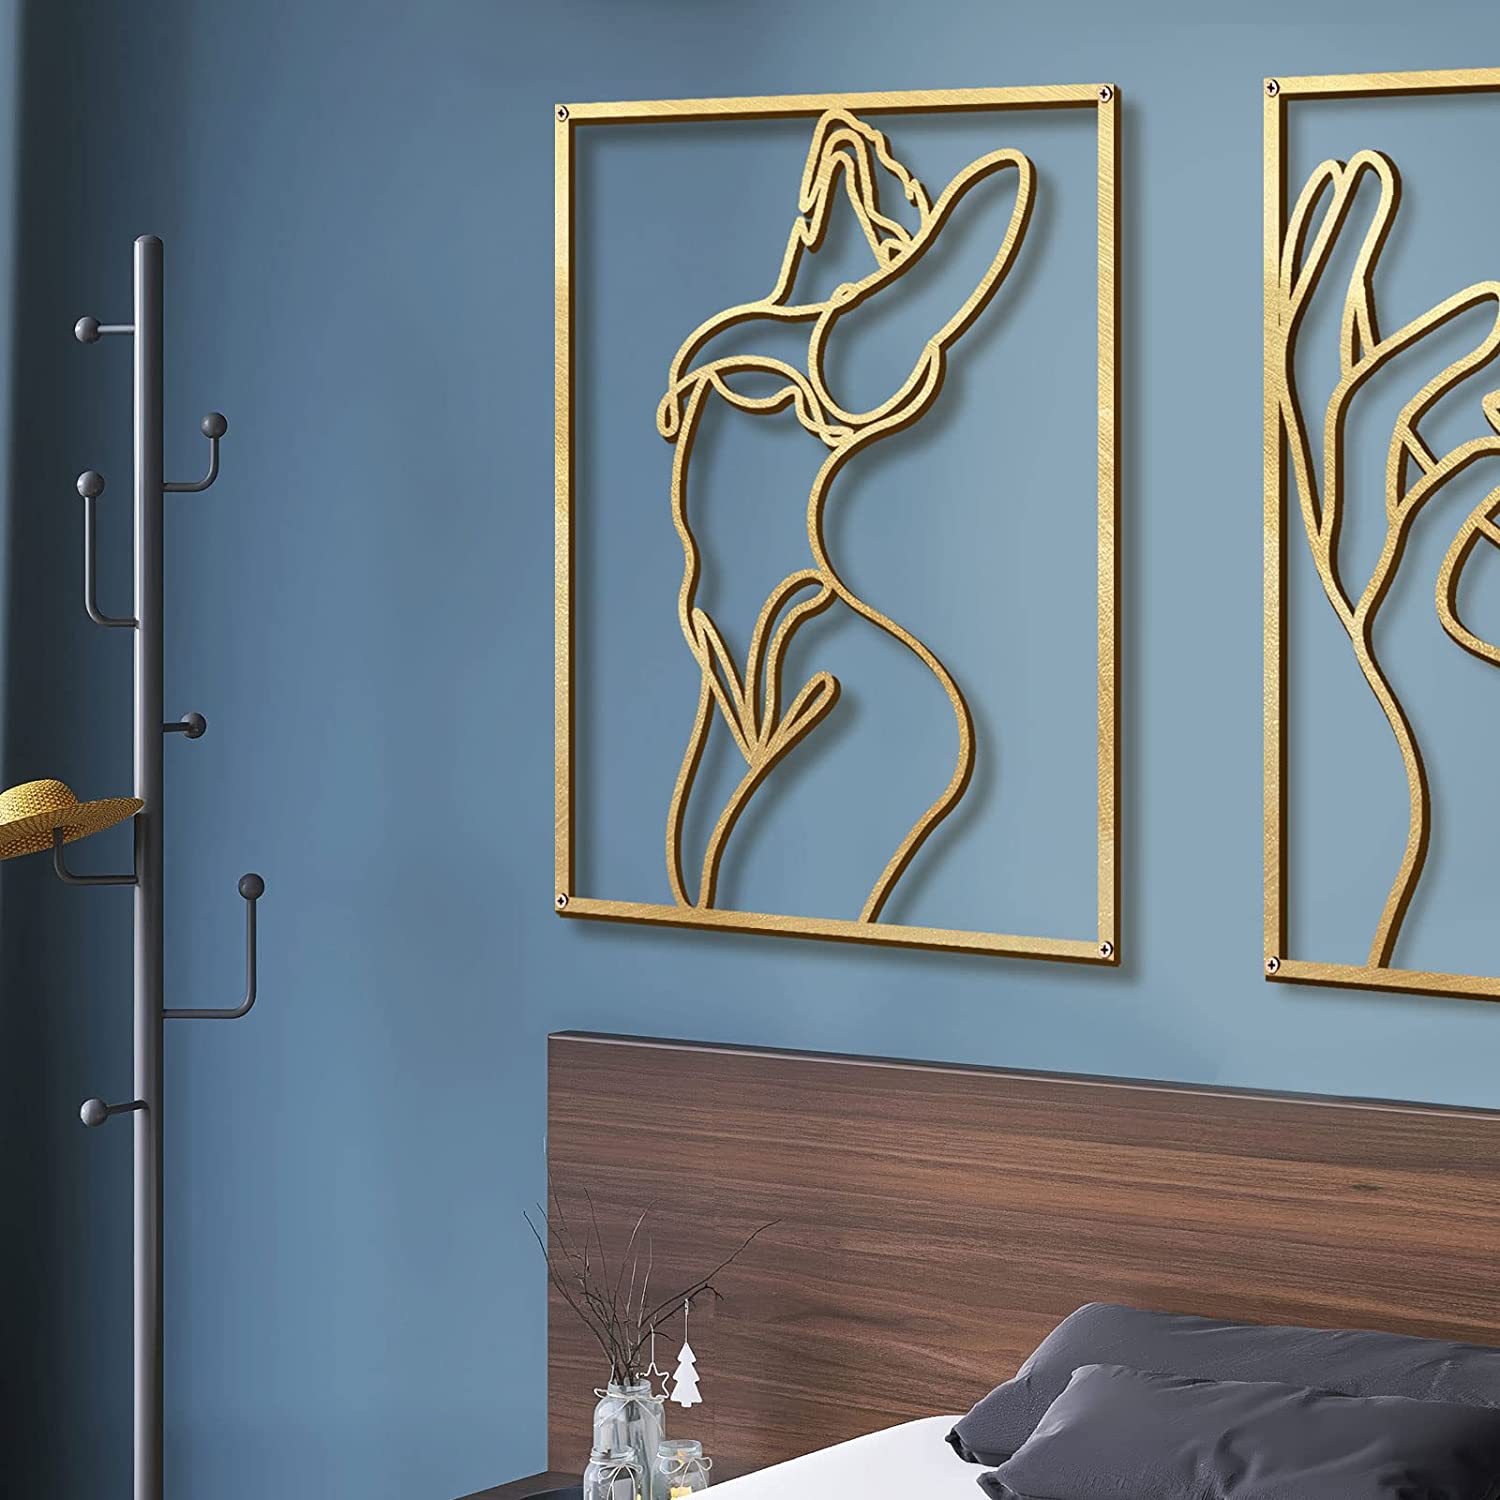 1pc modern metal wall decor abstract female silhouette sculpture for bedroom living room and bathroom thickened line art design for elegant home decor details 5